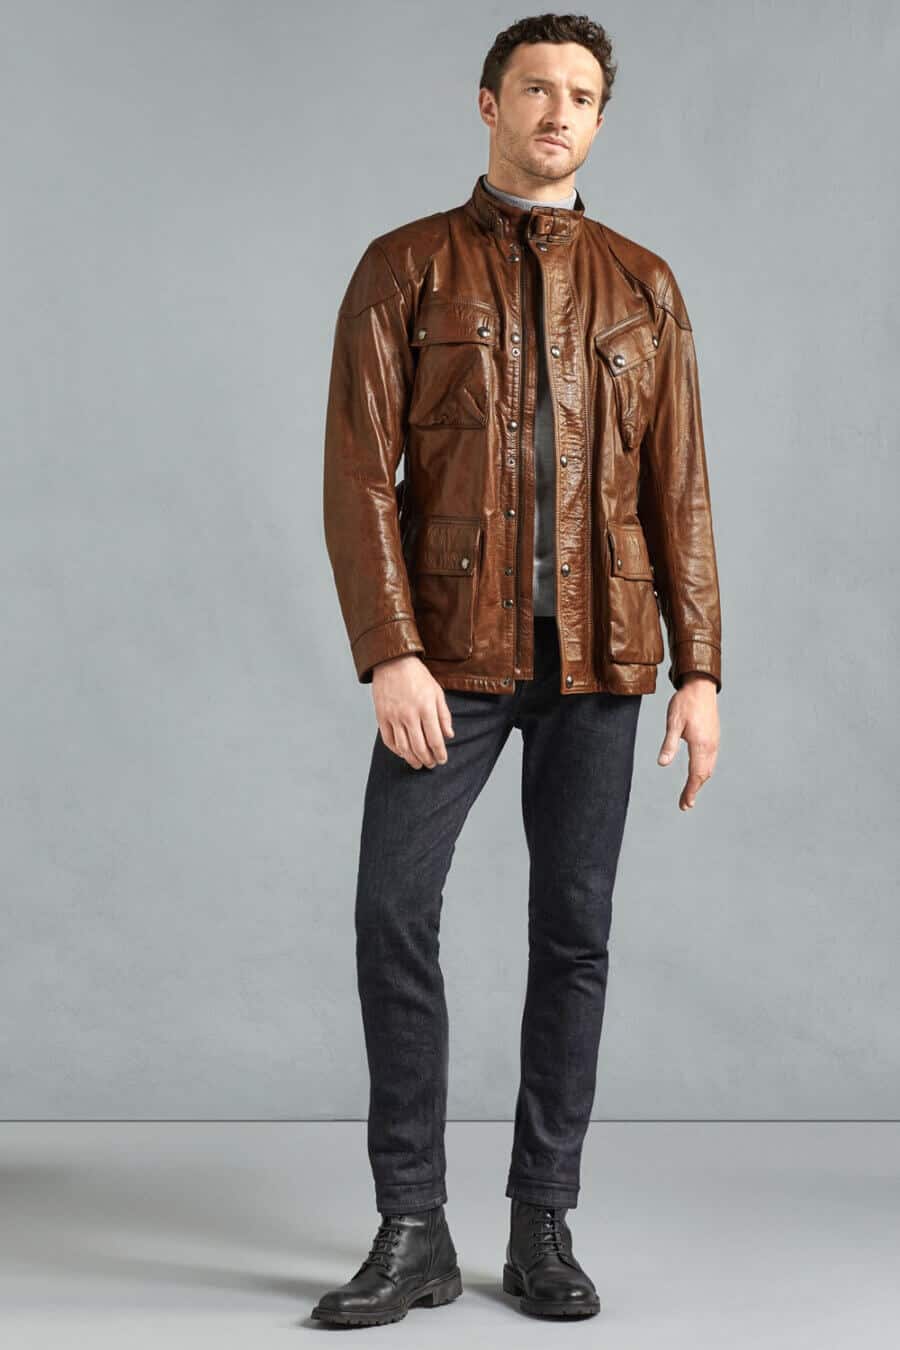 Men's black jeans and brown leather motorcycle jacket outfit